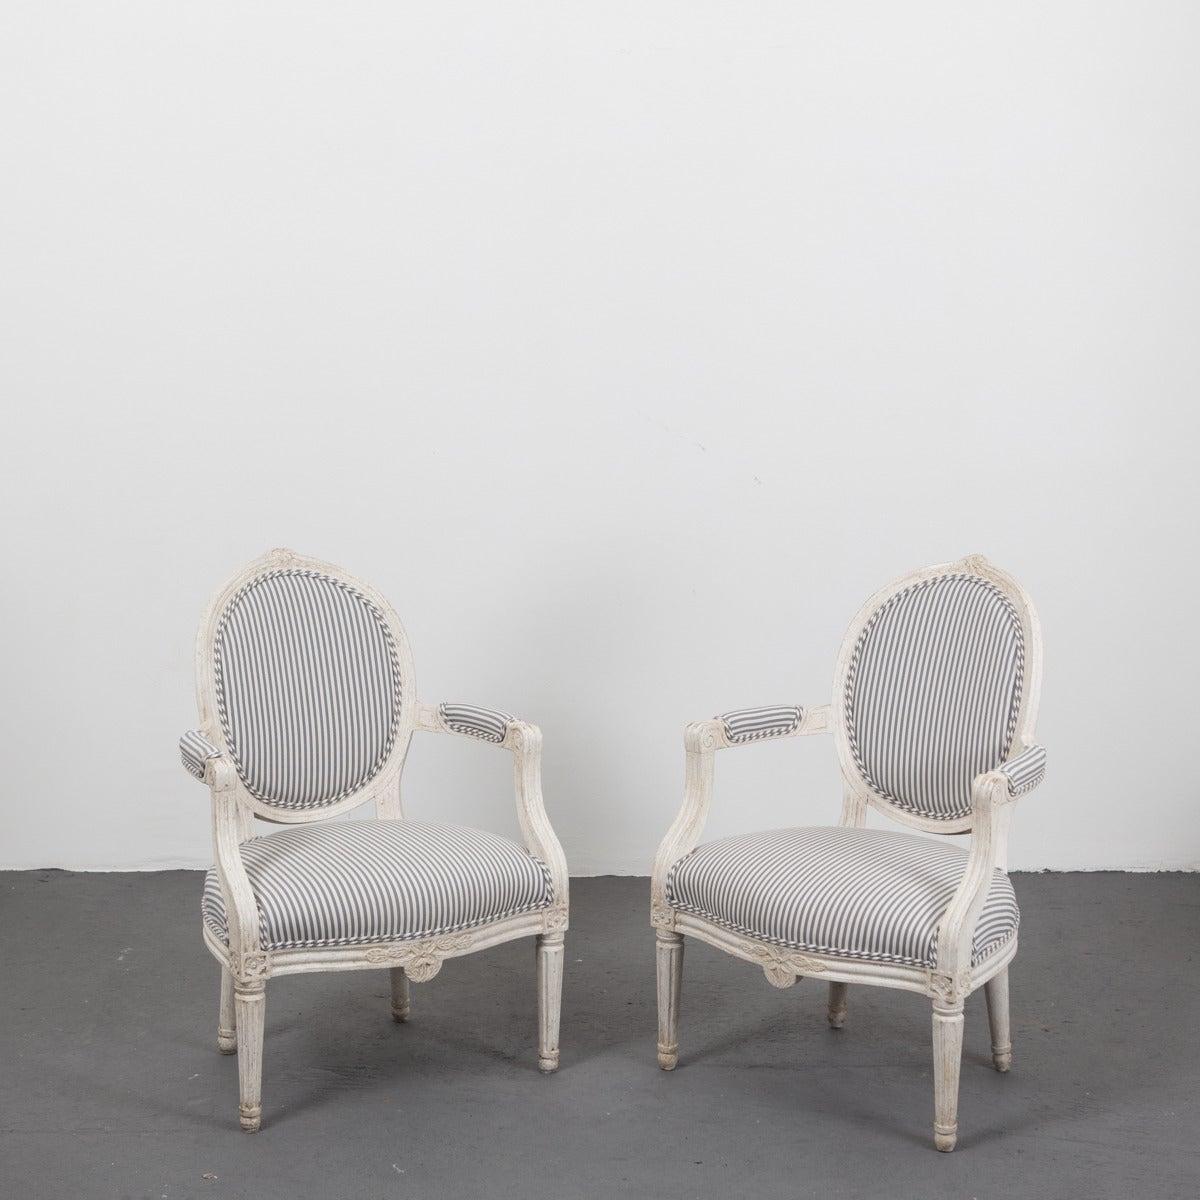 Armchairs pair of Swedish Gustavian 18th century, Sweden. A pair of Swedish Gustavian armchairs from the early part of the Gustavian period. Upholstered medallion shaped back splat and a shield shaped seat. Frieze with carved flowers matching the